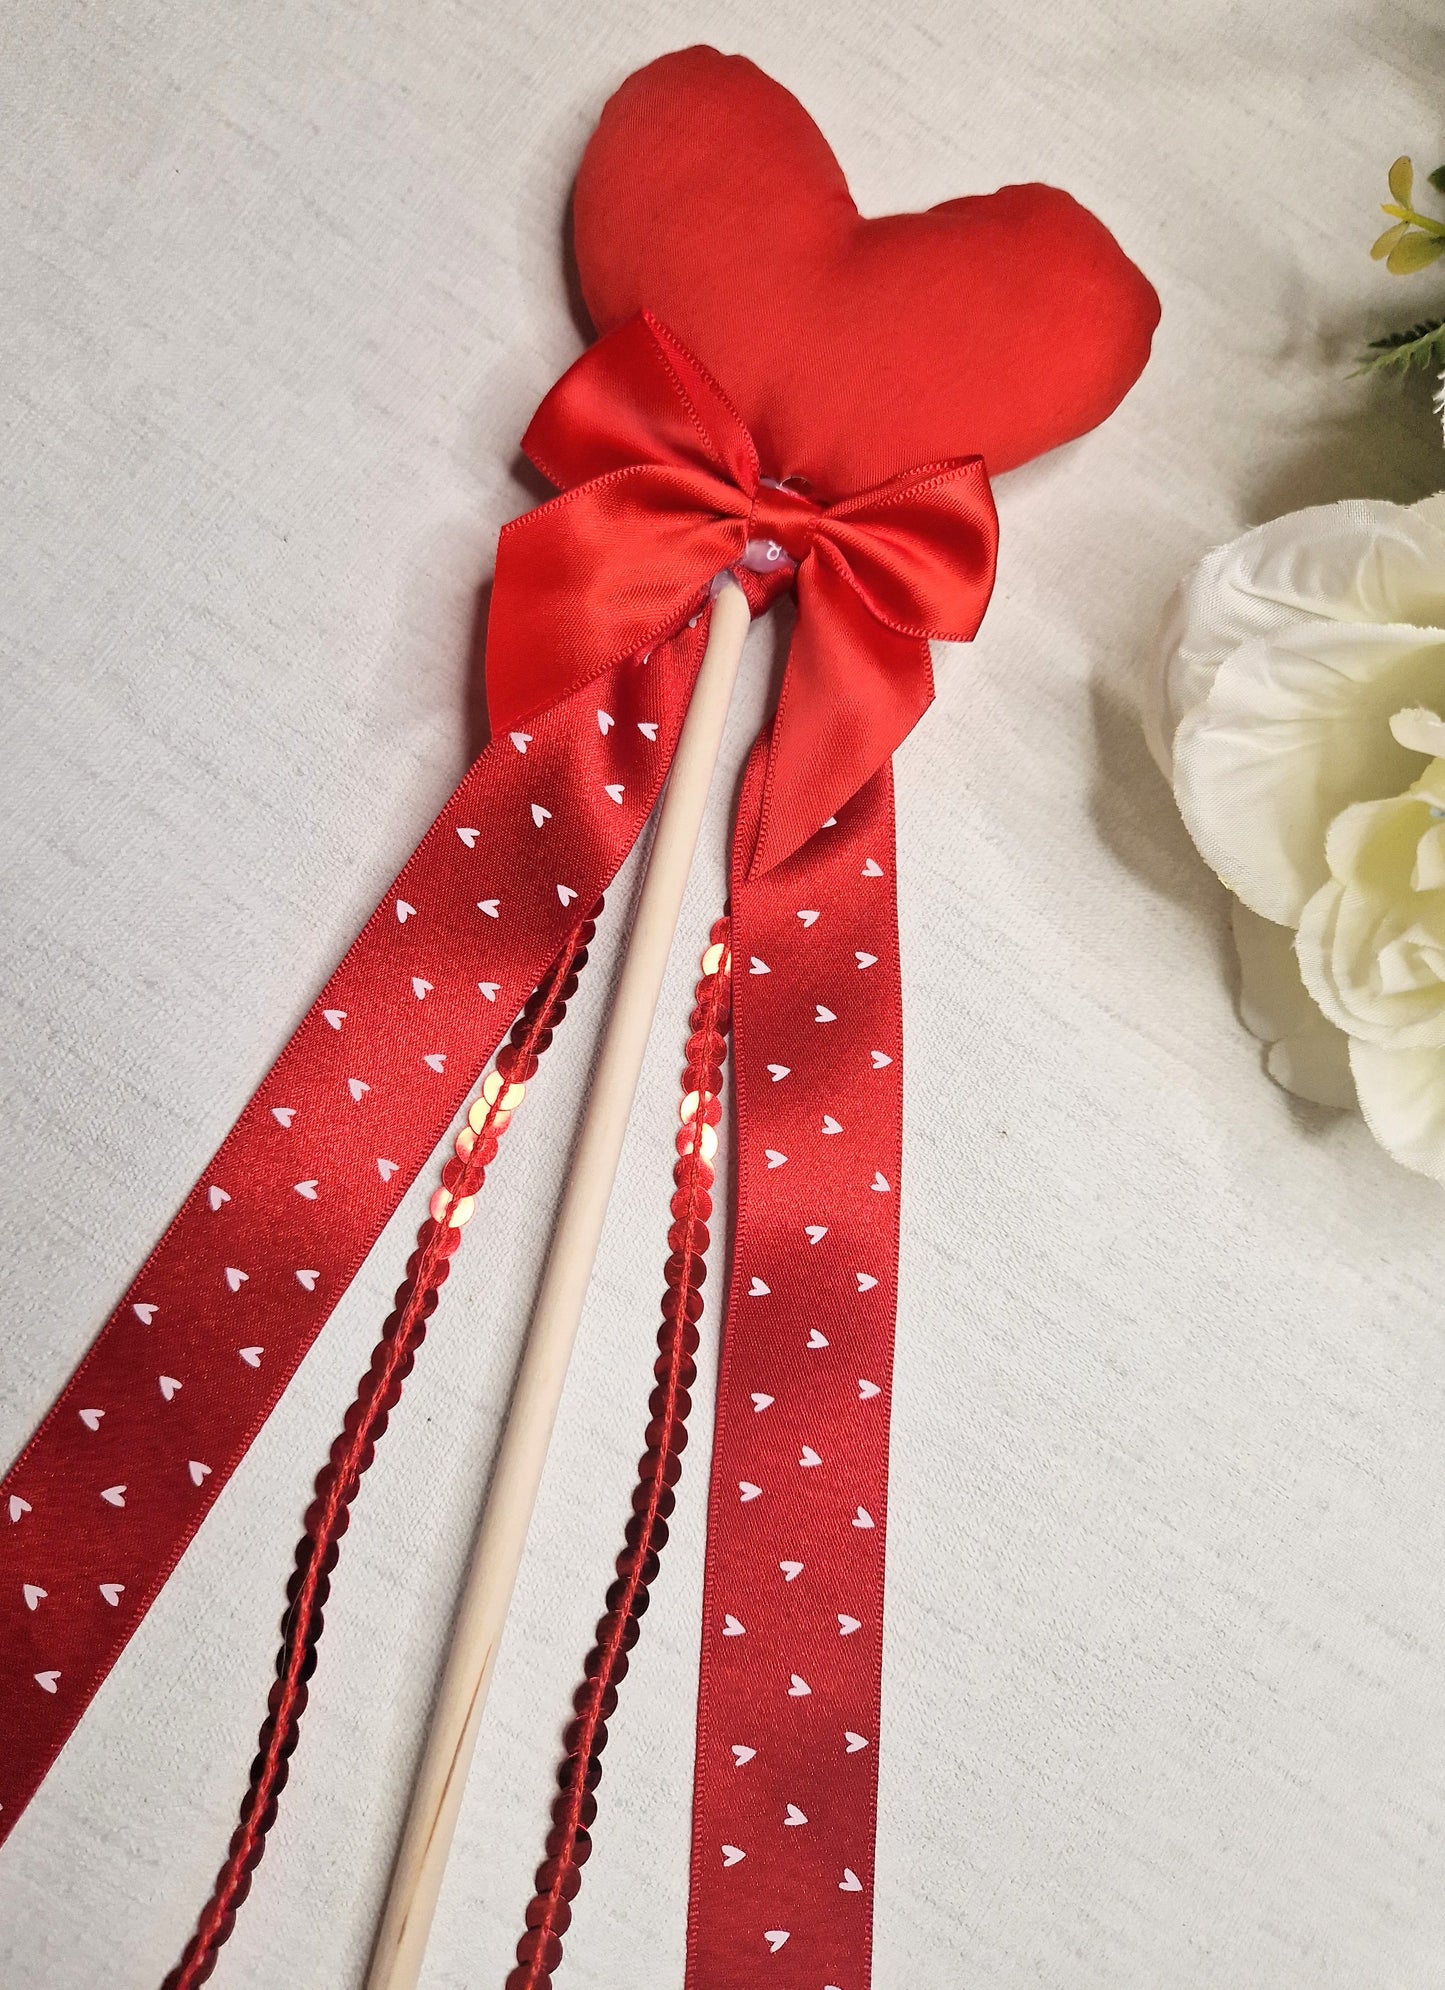 Red heart valentines wand